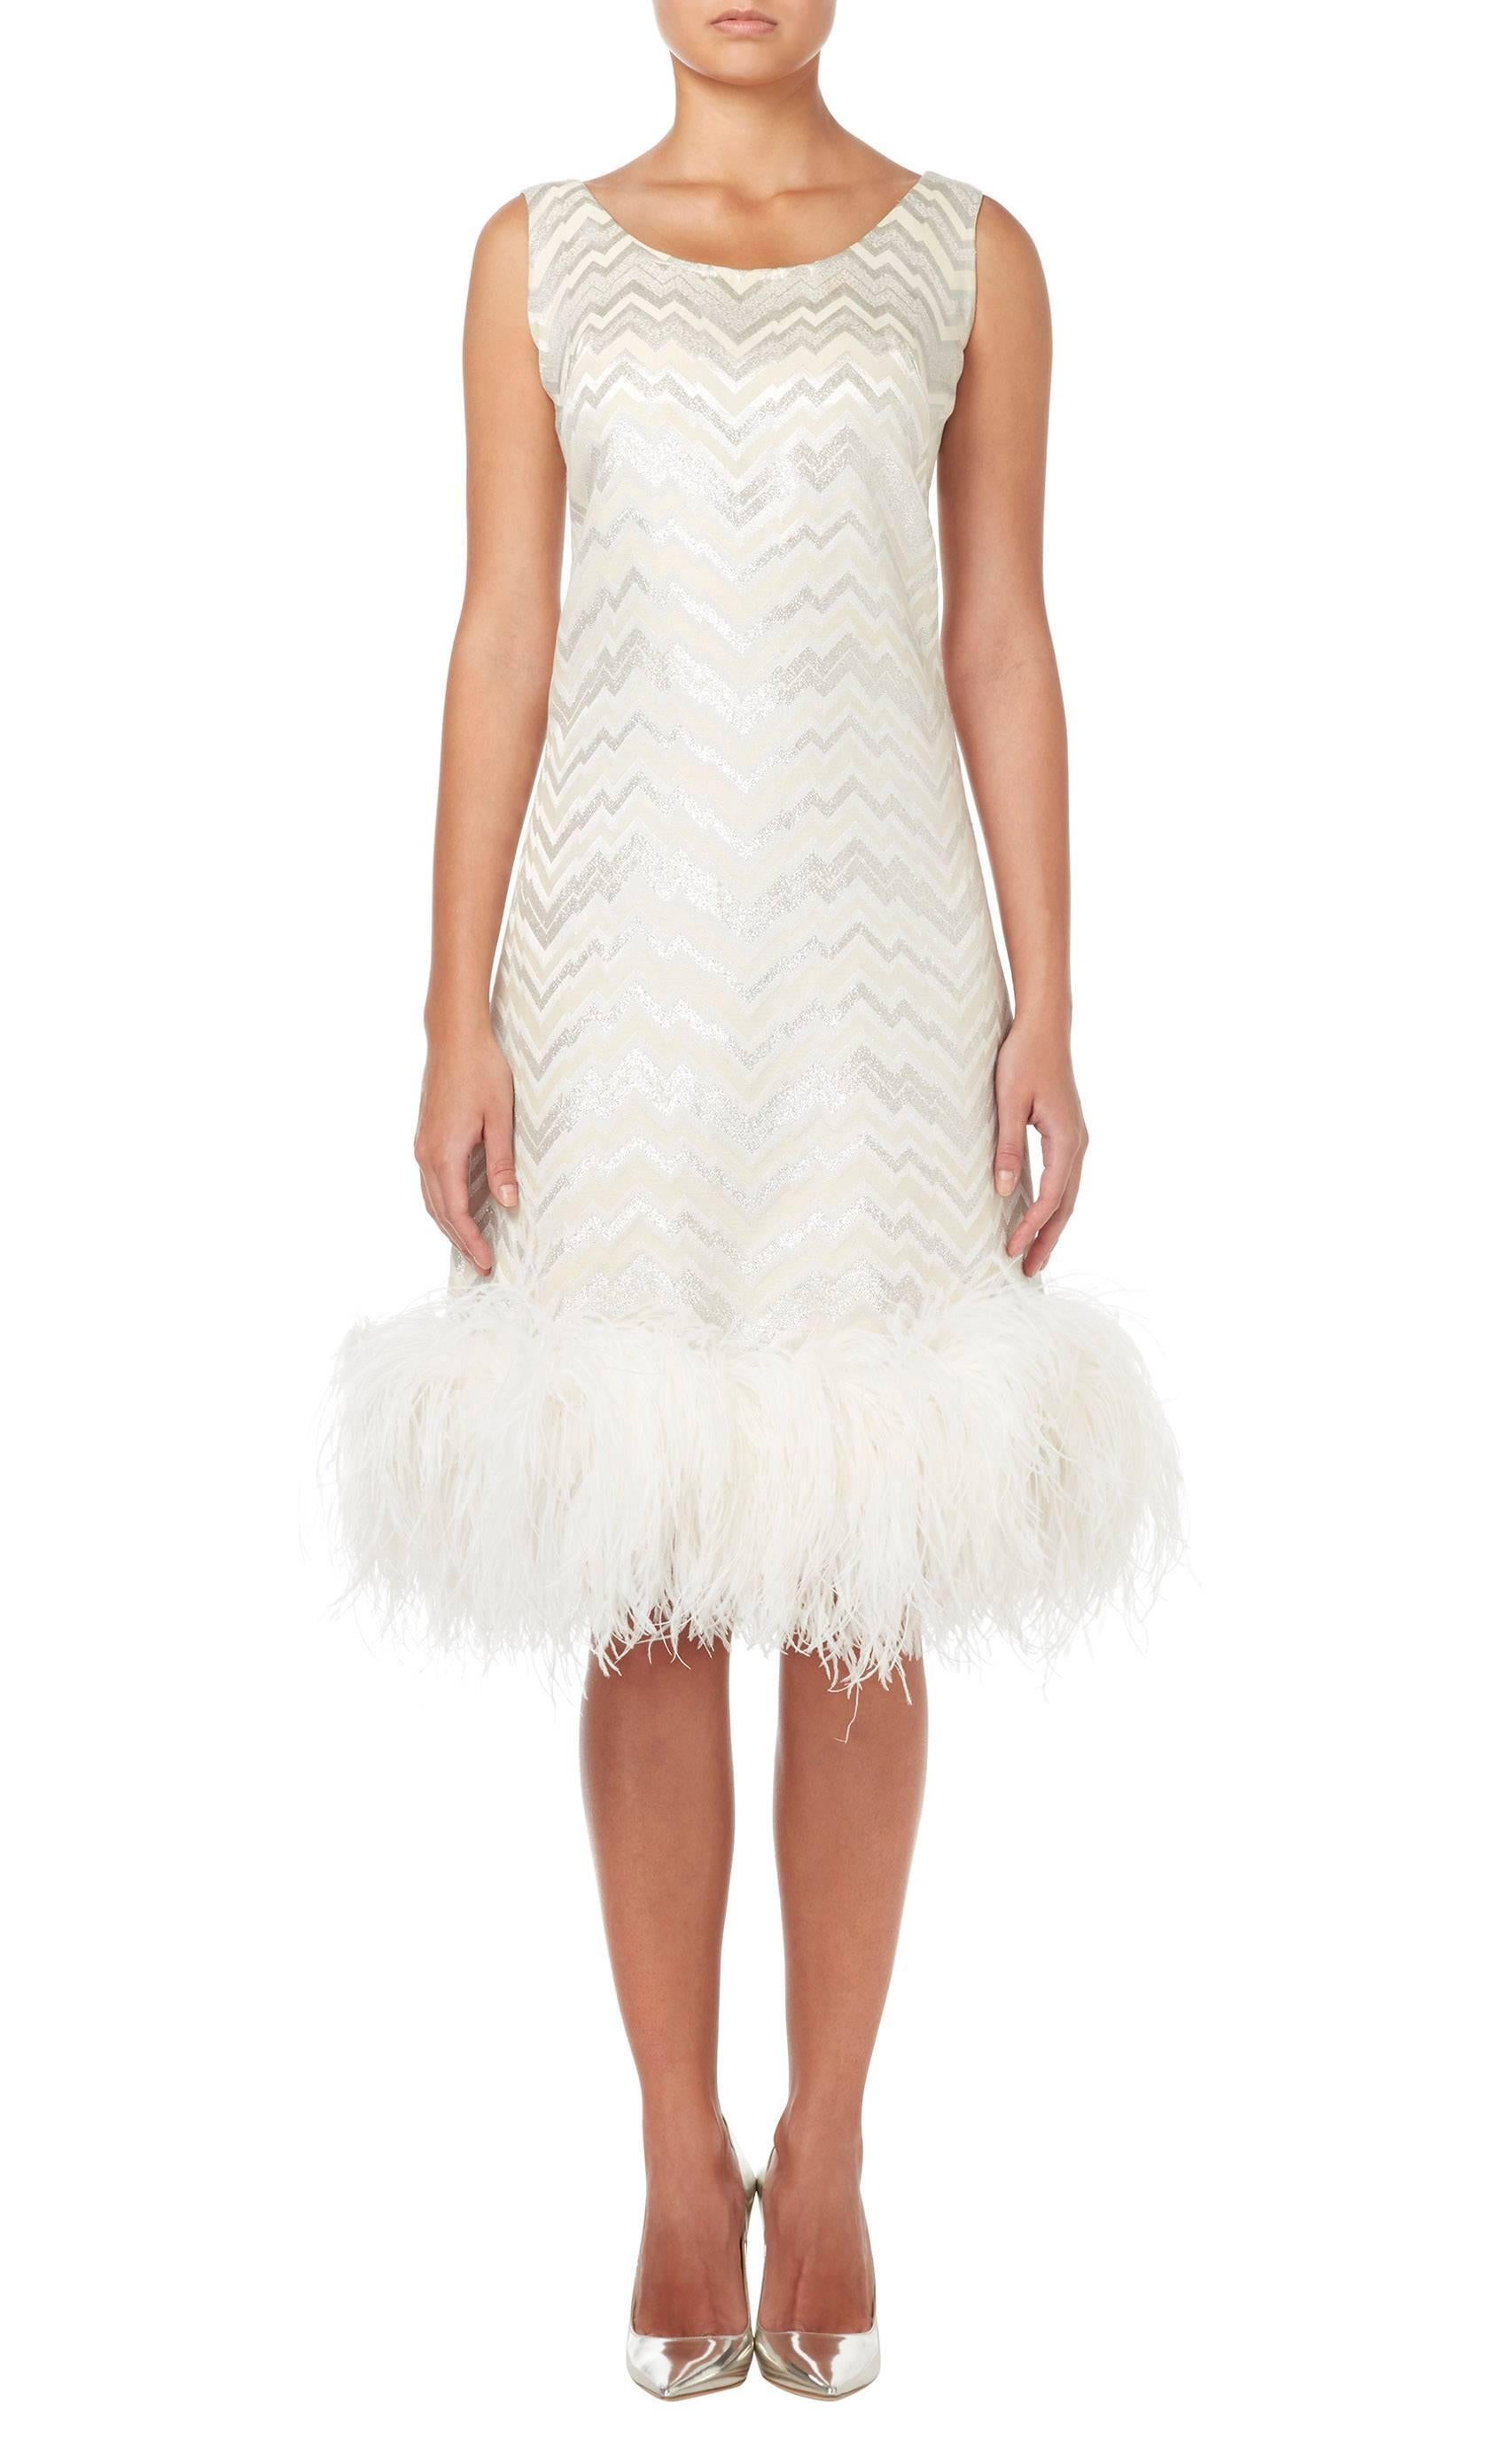 Constructed in ivory silk with a silver Lurex zigzag pattern
Featuring an ivory marabou feather hemline
Zip fastening to the rear
Excellent condition with some small marks to the fabric and bears the original label, lining and